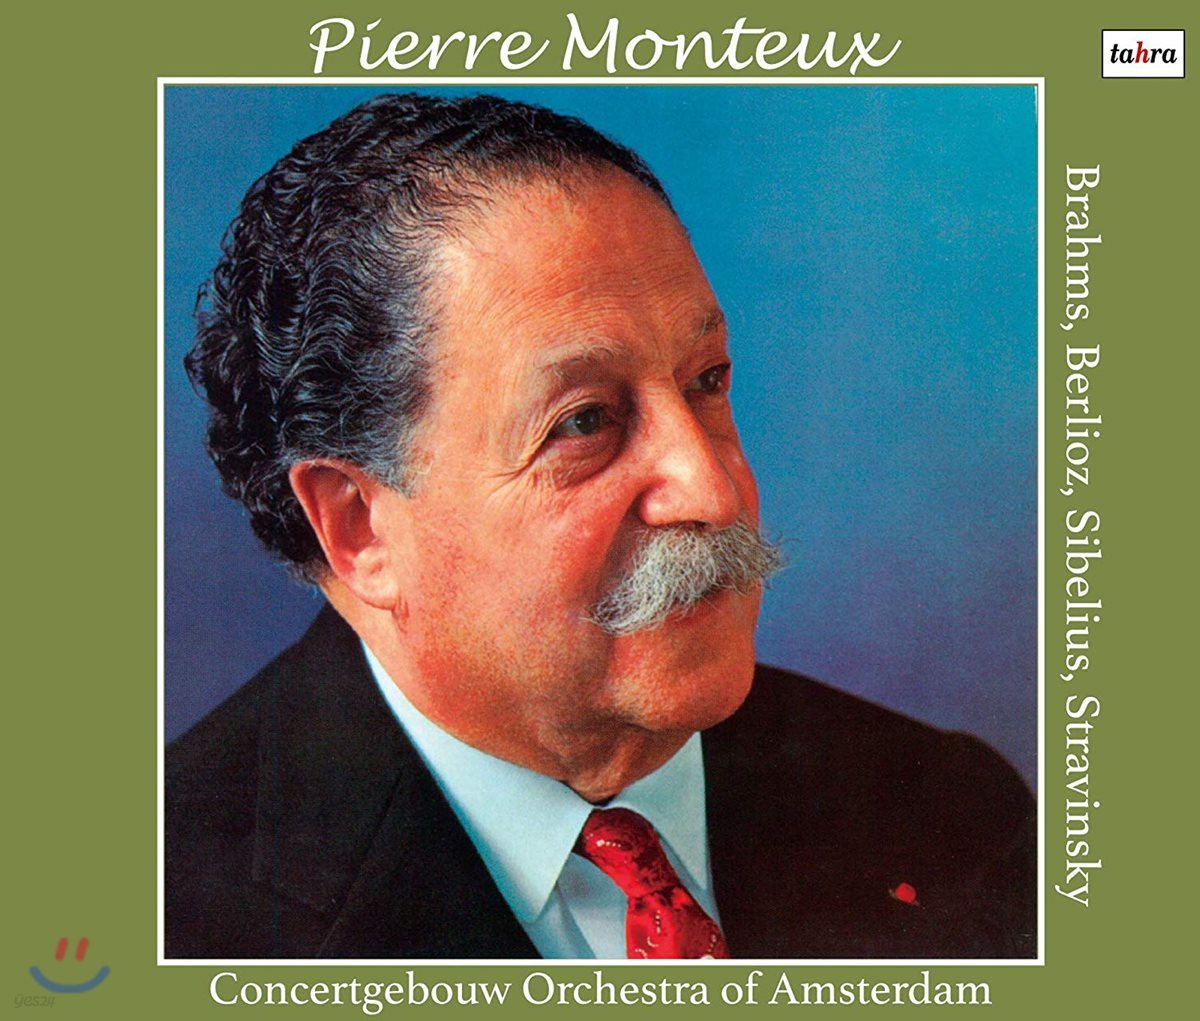 Pierre Monteux 피에르 몽퇴 &amp; 콘서트헤보우의 예술 (Pierre Monteux and Concertgebouw Orchestra of Amsterdam) [4CD]